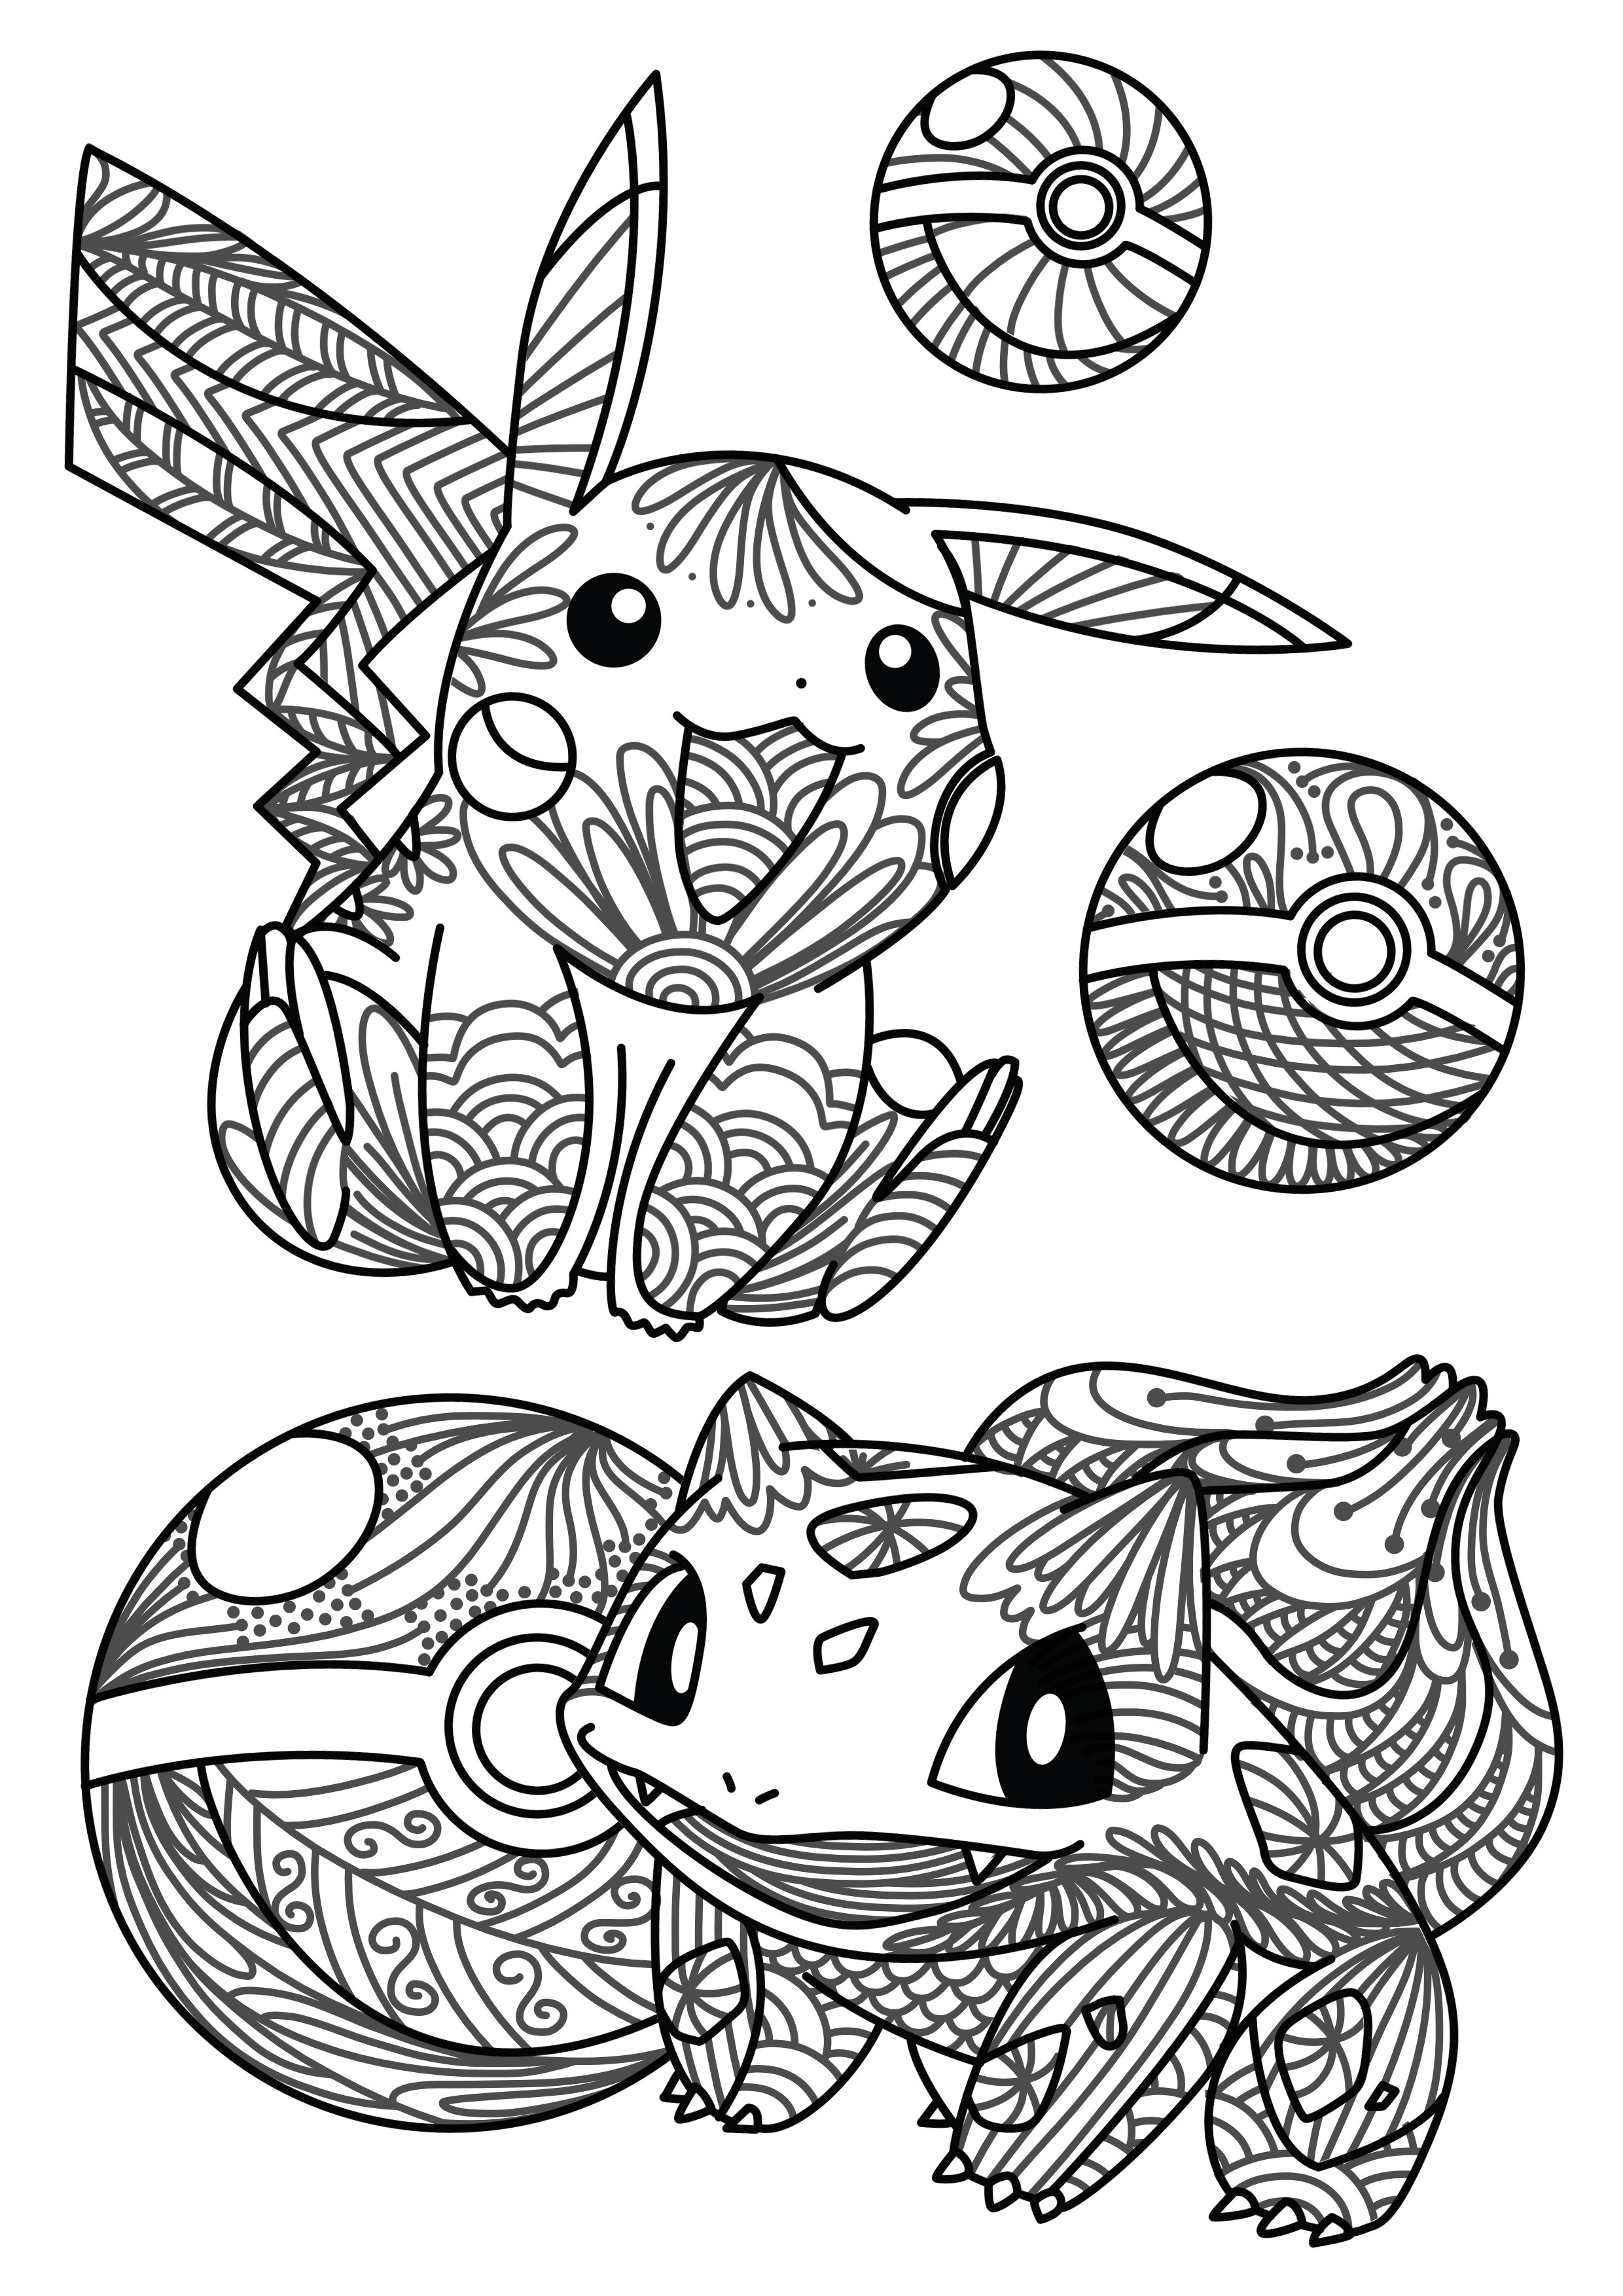 Pokemon Adult Coloring Book
 You caught it Free Pokemon Adult Coloring Sheet – Craft